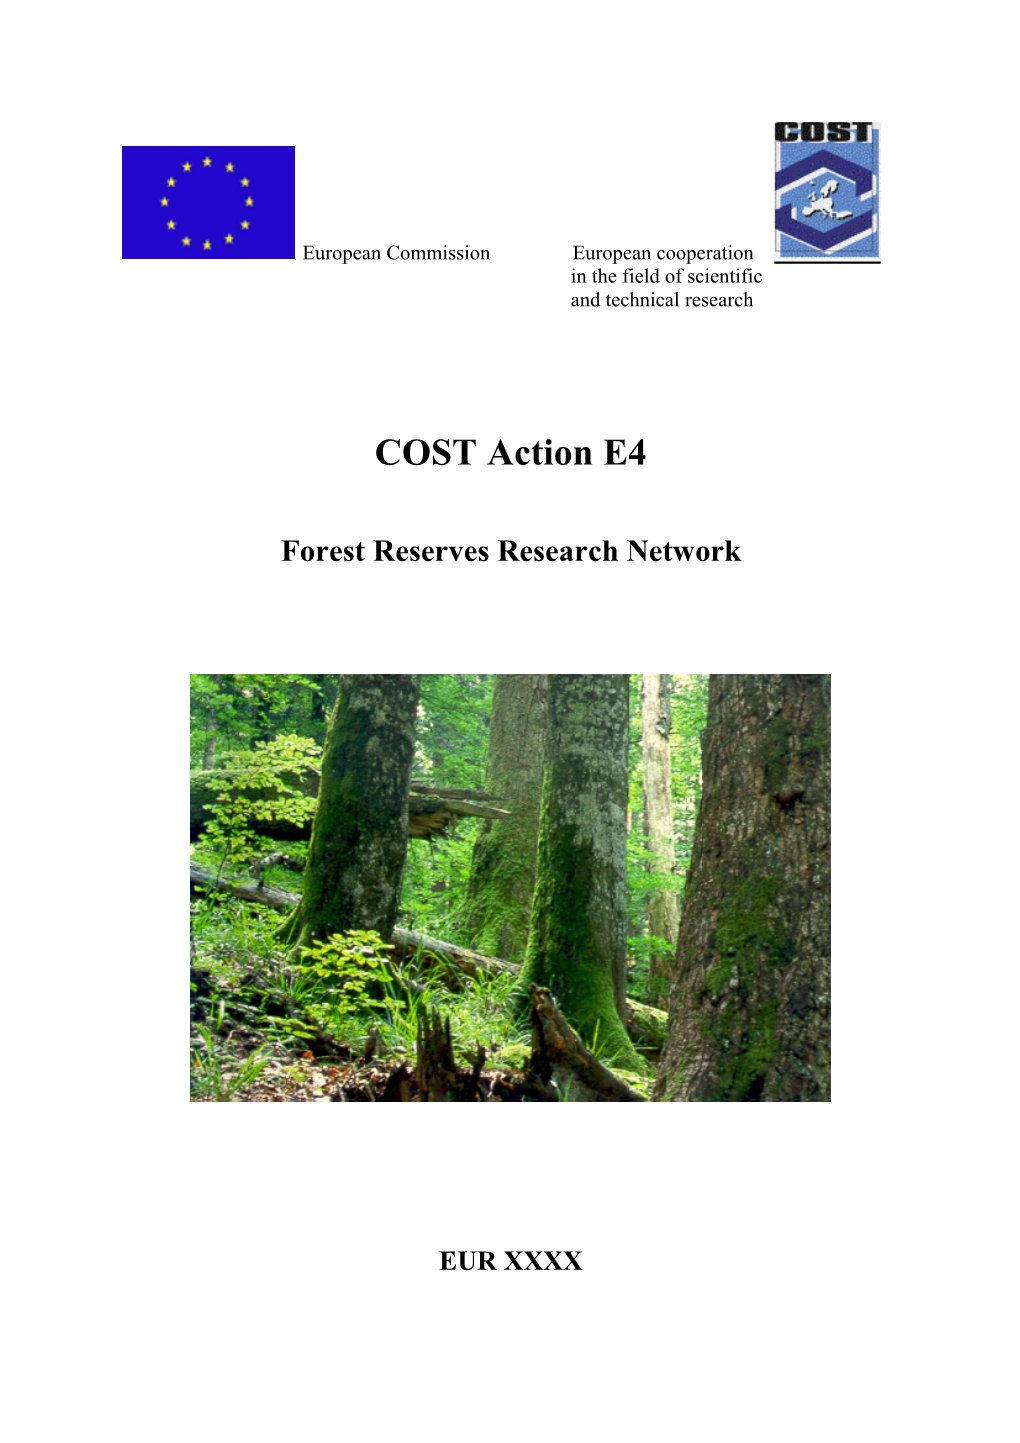 COST Action E4